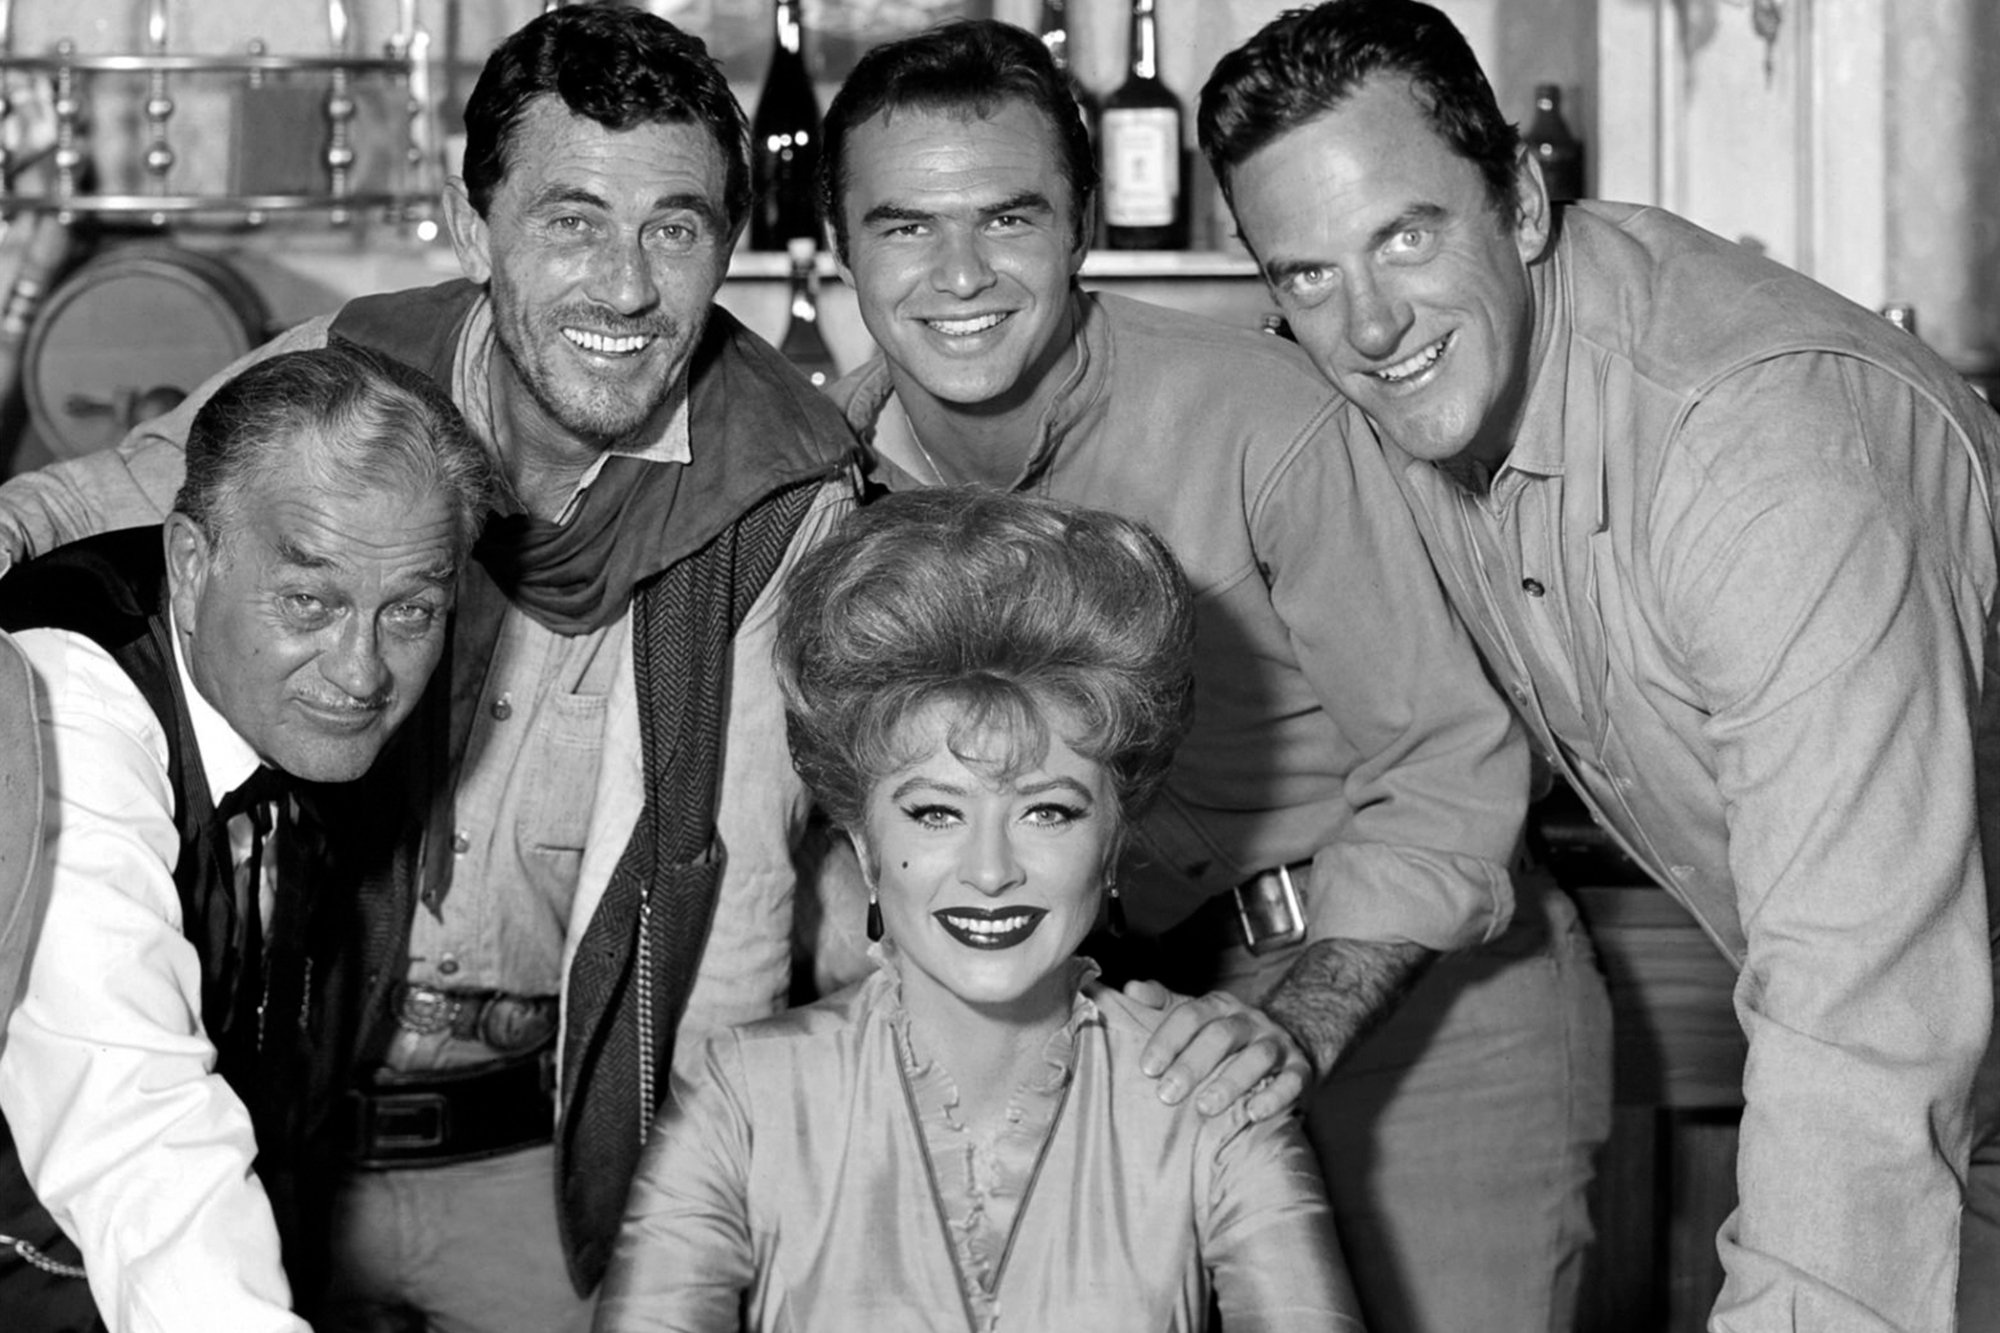 'Gunsmoke' Amanda Blake as Kitty Russell, Milburn Stone as Doc Adams, Ken Curtis as Festus Haggen, Burt Reynolds as Quint Asper, and James Arness as Matt Dillon in a black-and-white photograph. Blake is sitting down and her co-stars are all standing behind her smiling.